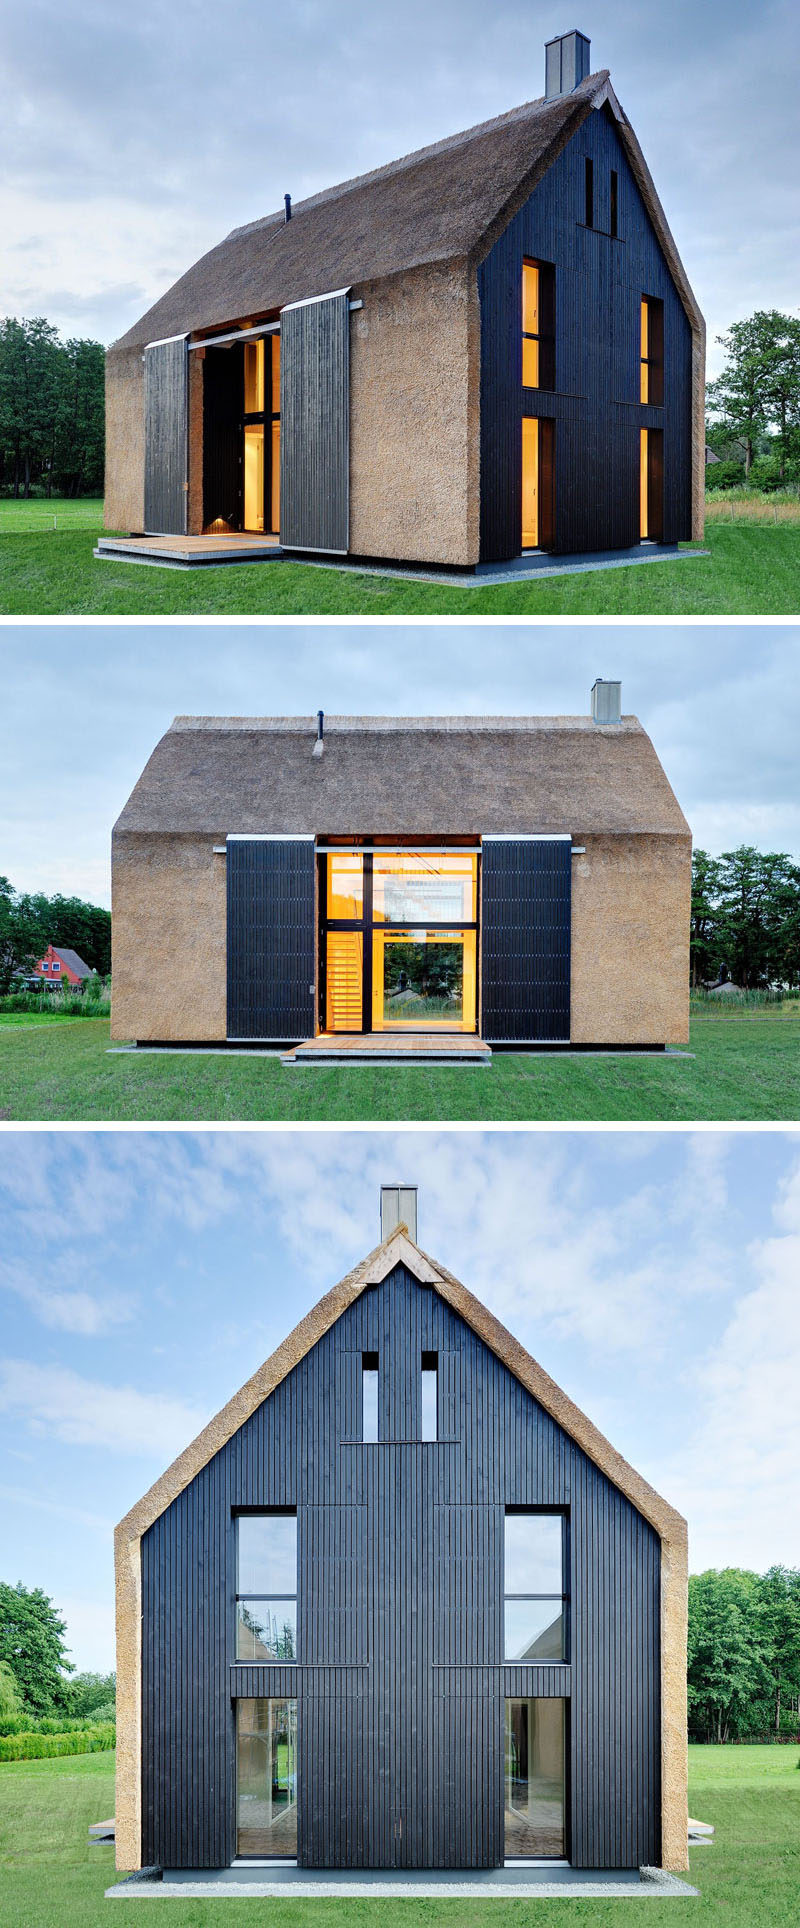 12 Examples Of Modern Houses And Buildings That Have A Thatched Roof // Thatch covers the entire exterior of this home including the roof and walls to create a textured look and contrast the black wood paneling.